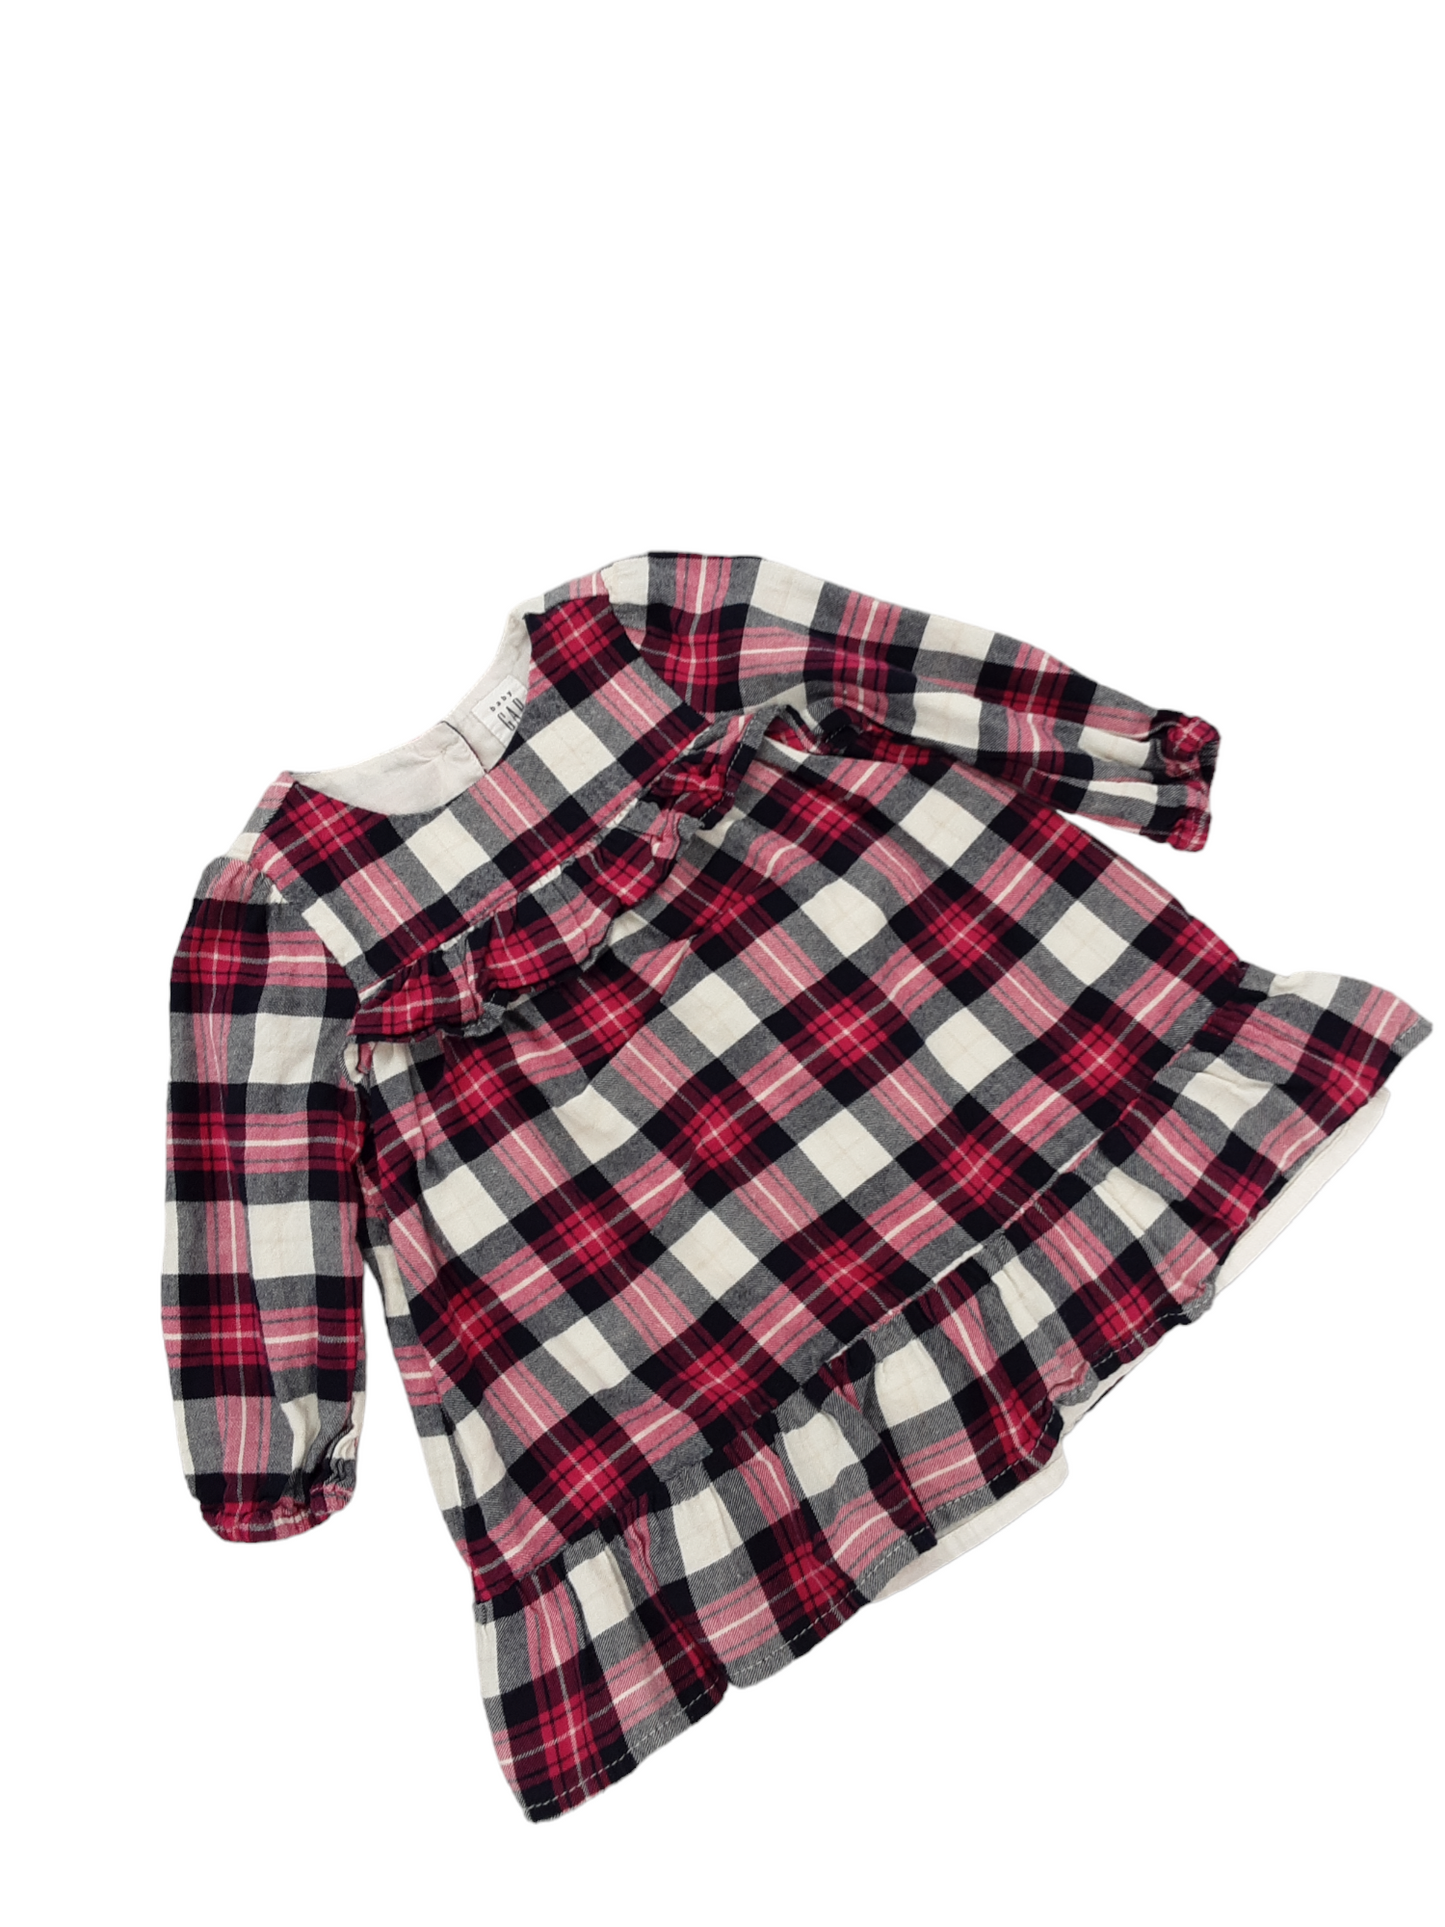 Plaid 6 to 12 month tunic